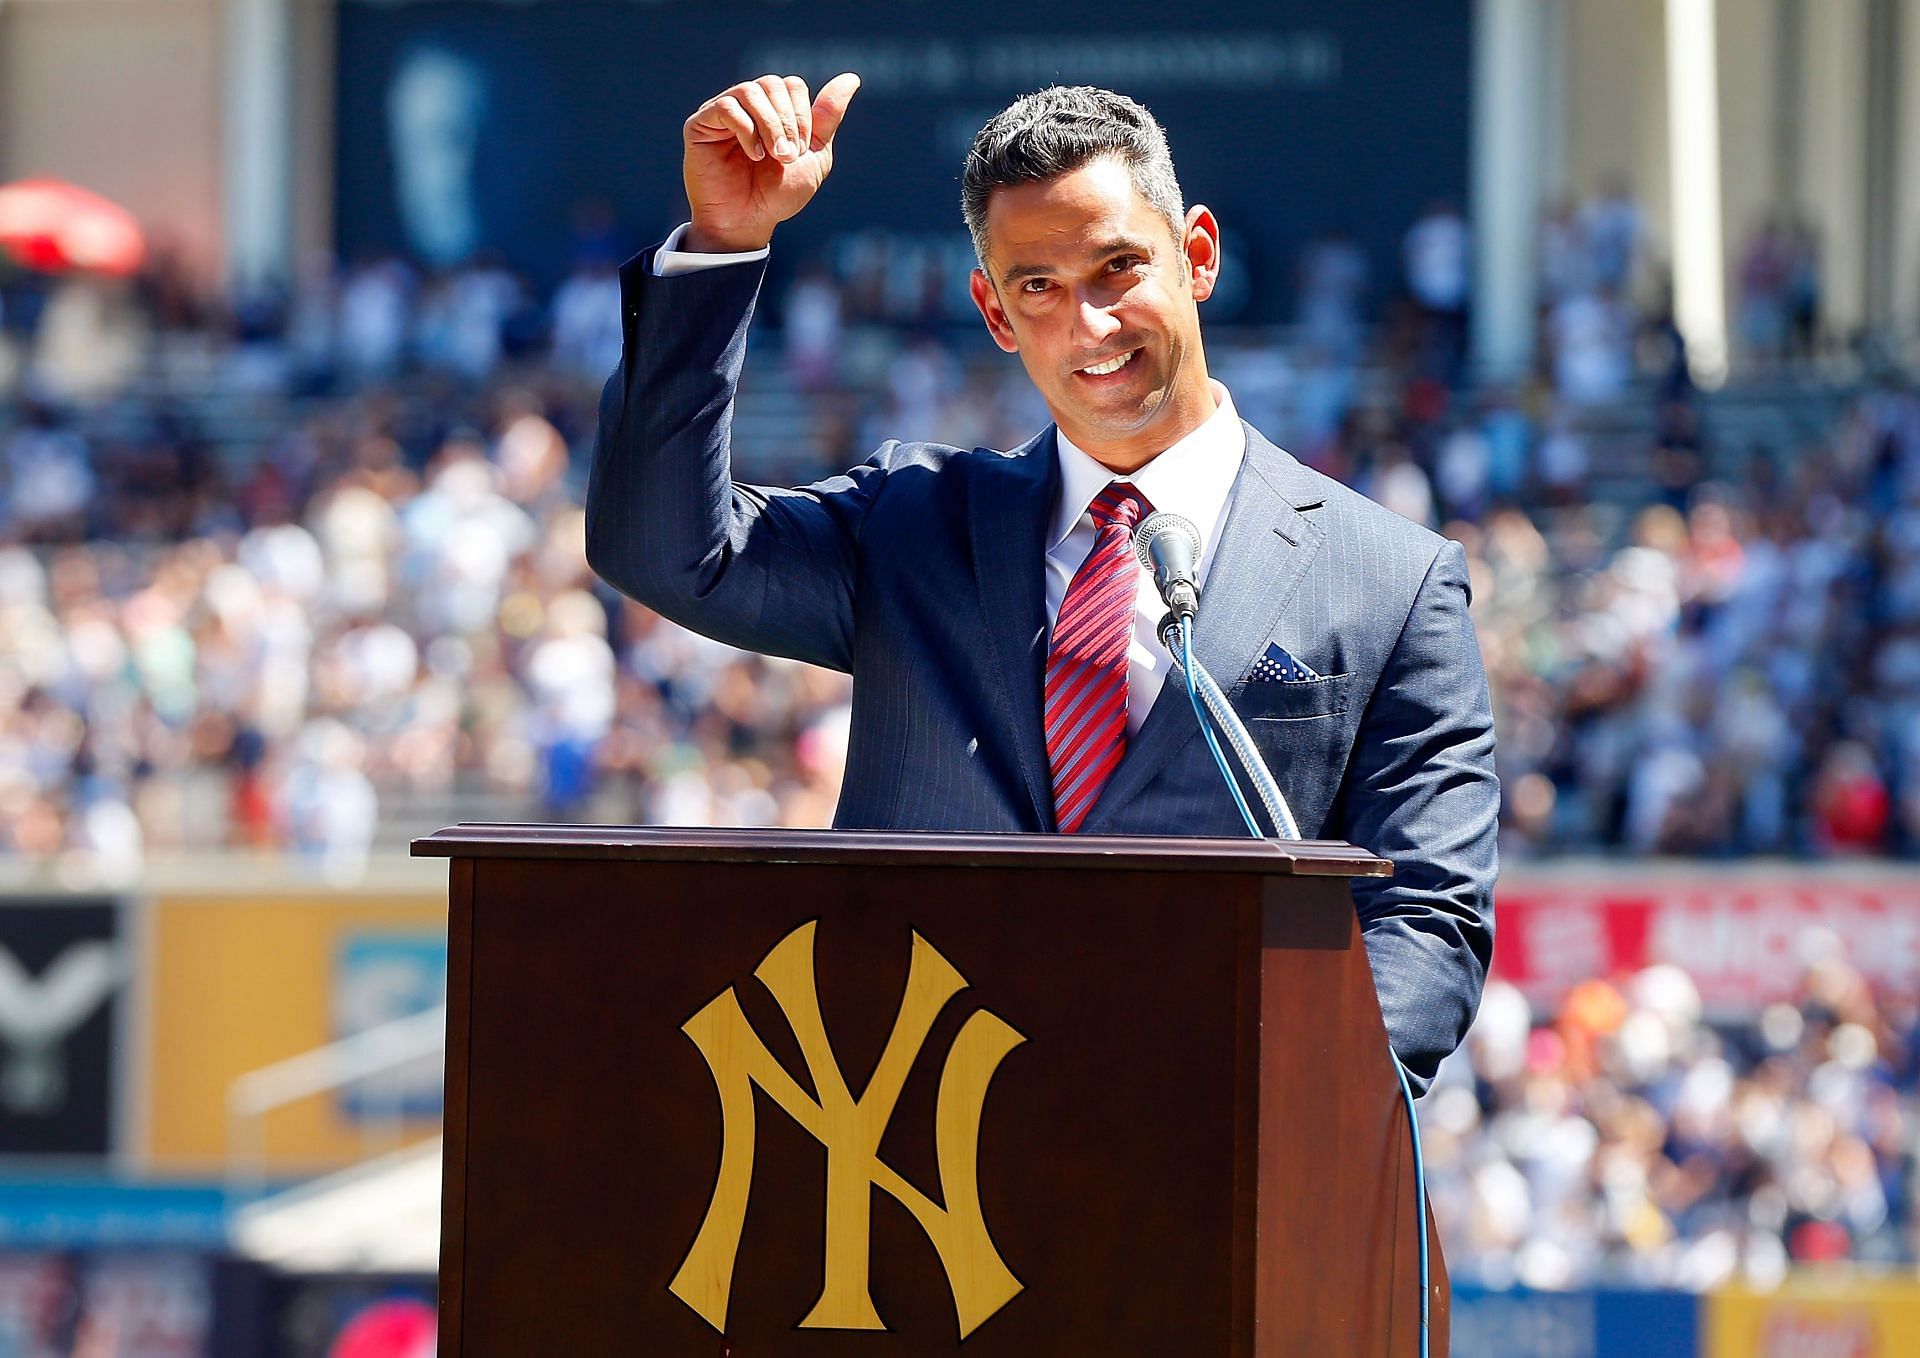 Cleveland Indians v New York Yankees: NEW YORK, NY - AUGUST 22: Former New York Yankee Jorge Posada speaks to the crowd during a ceremony retiring his number before the Yankees play against the Cleveland Indians at Yankee Stadium on August 22, 2015 in the Bronx borough of New York City. (Photo by Jim McIsaac/Getty Images)